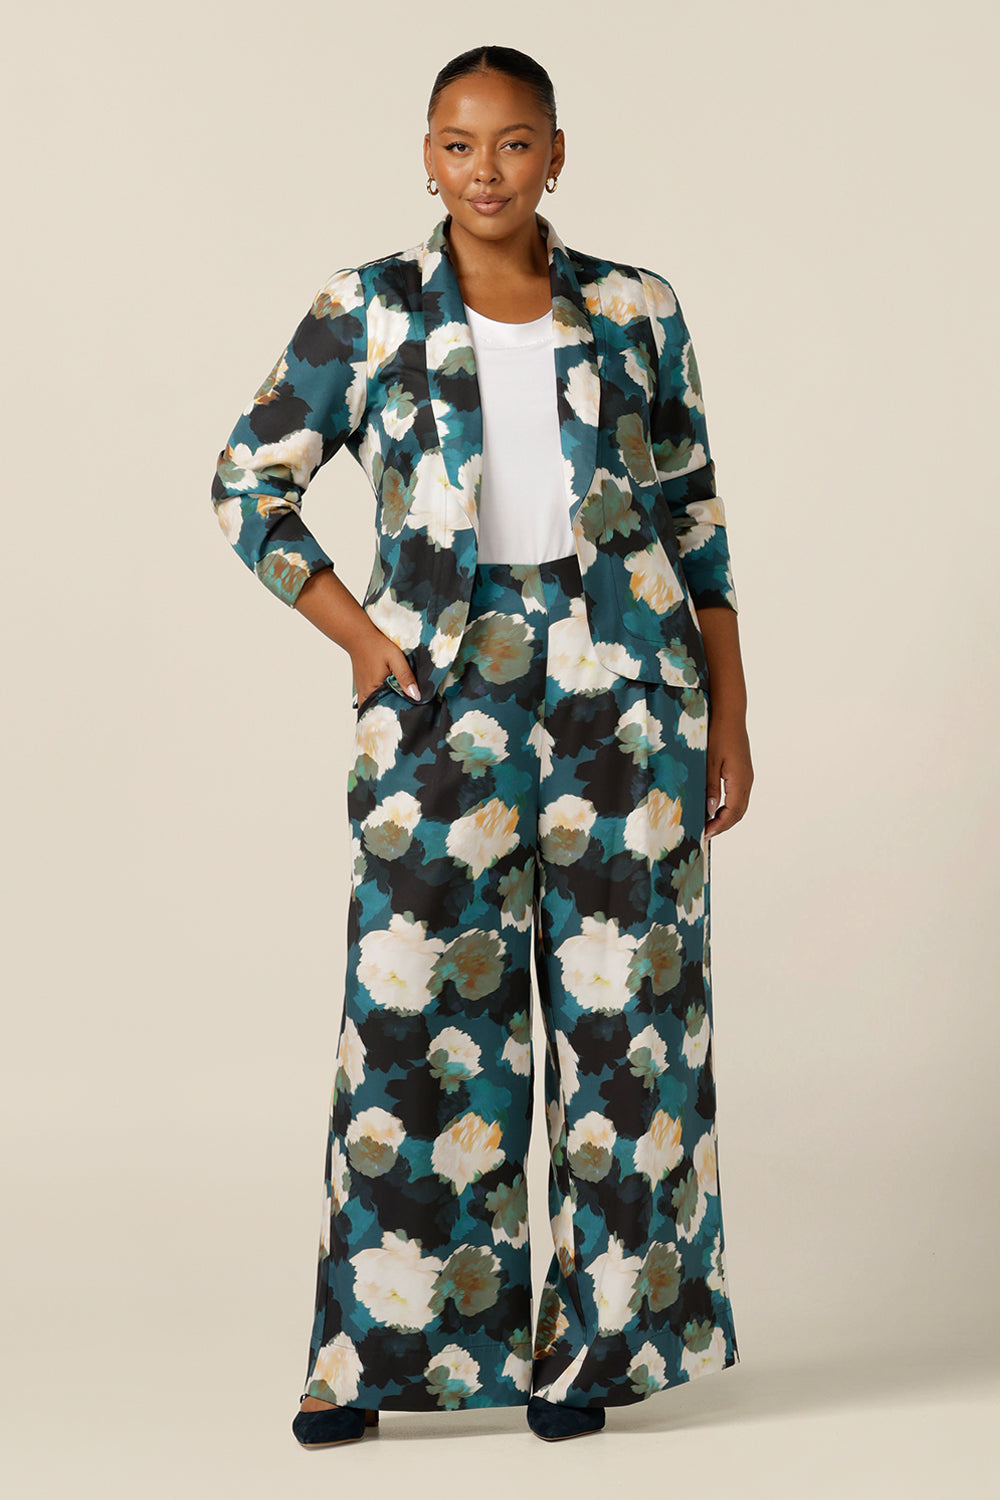 A size 18, plus size woman wears high-waisted printed wide-leg pants. Made in Australia from sustainable Tencel fabric, these eco-conscious trousers are part of women's clothing brand, elarroyoenterprises's focus on sustainable fashion. Worn with a printed soft tailored work blazer to create a corporate suit look for plus size and fuller figures.